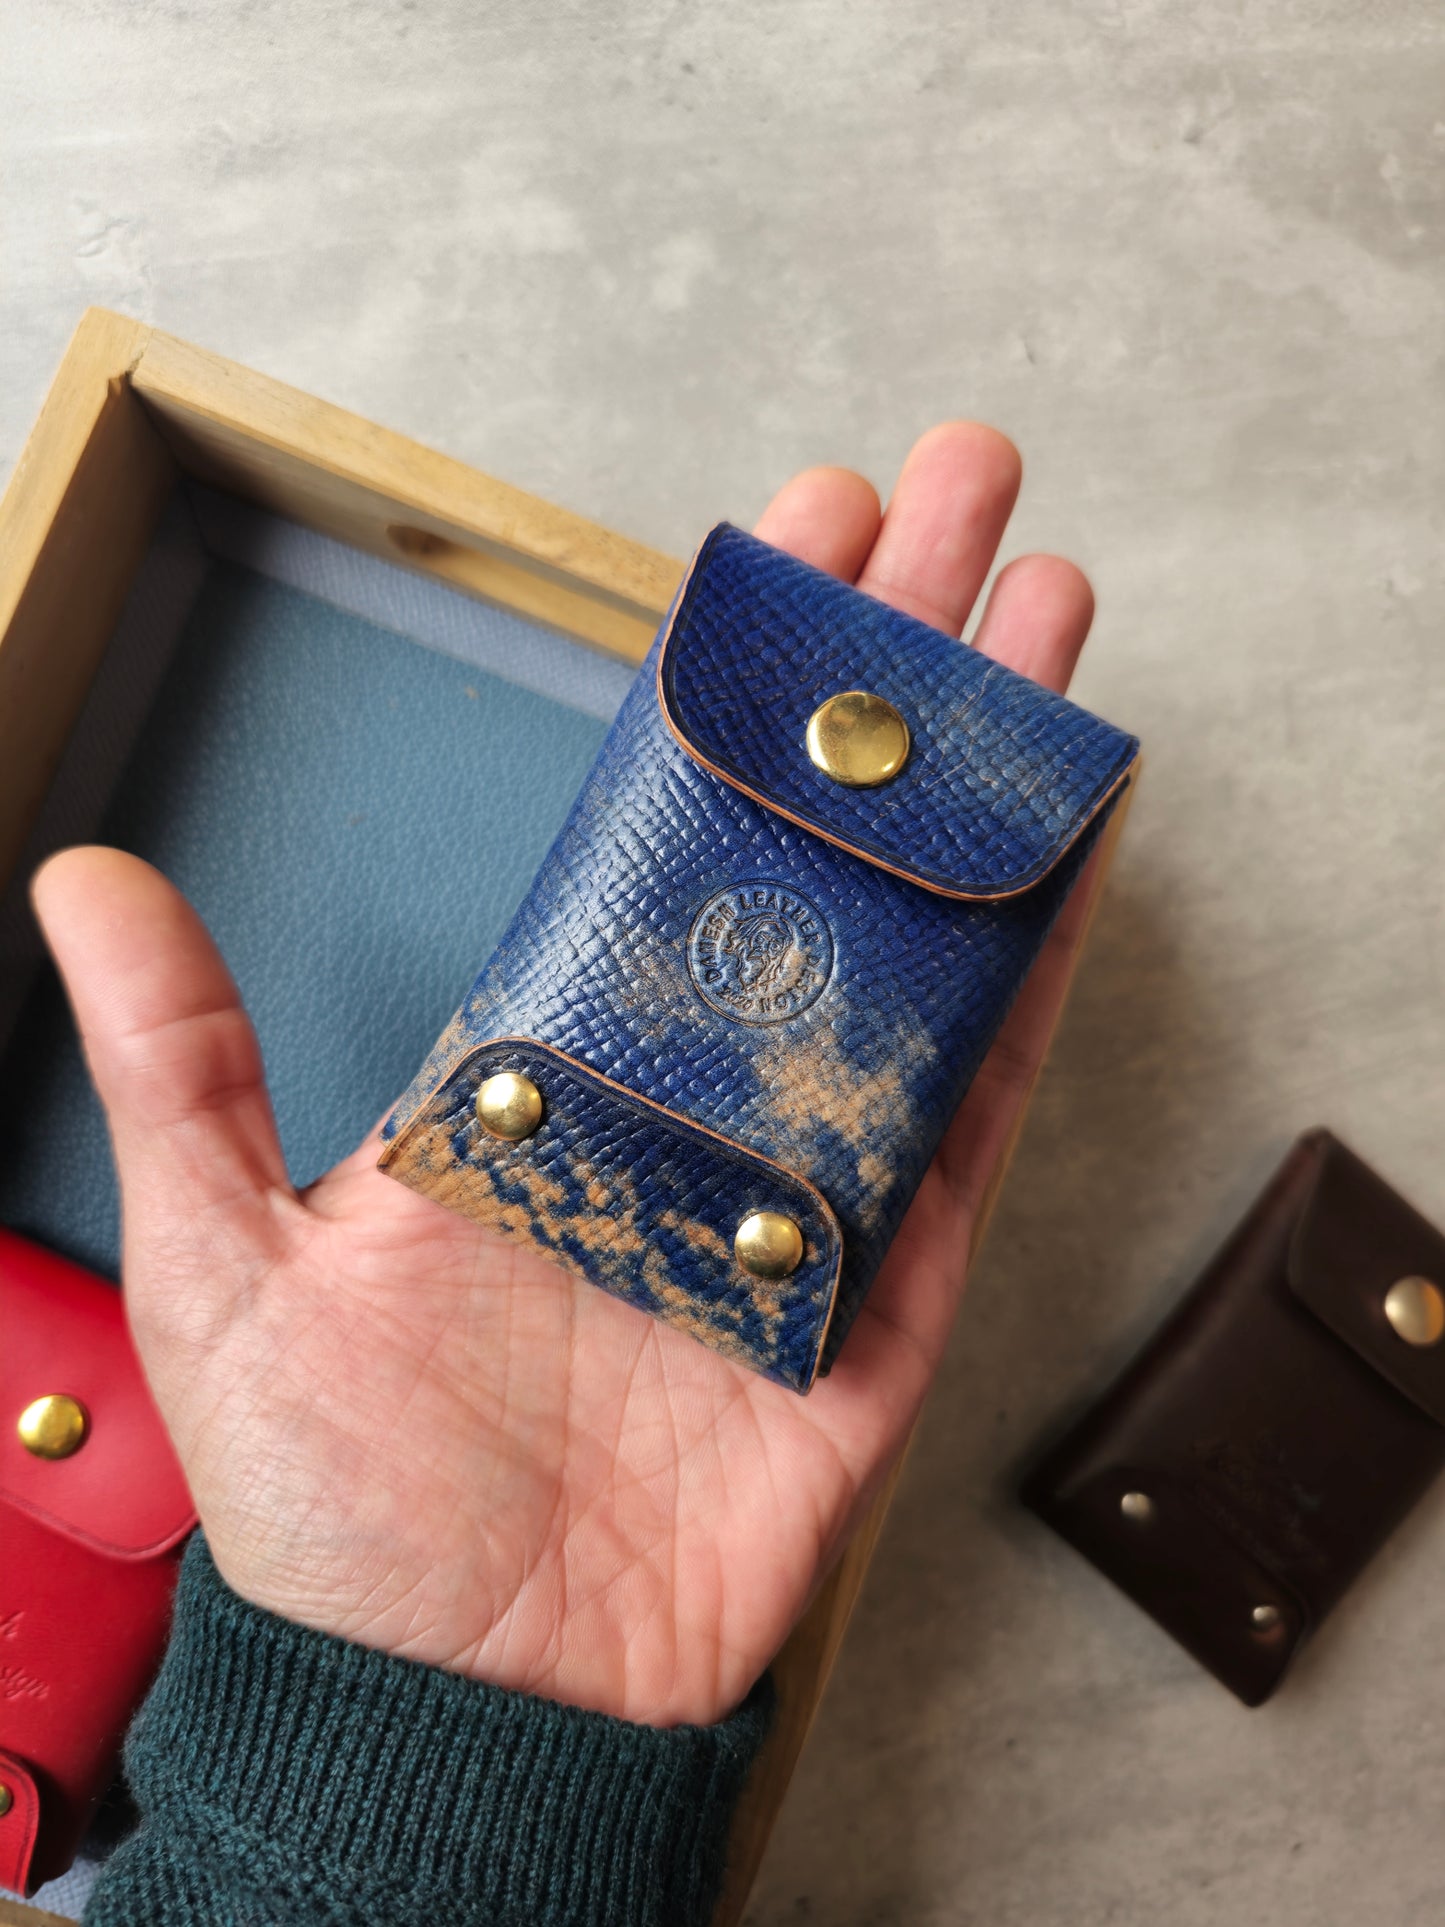 Beyond wallet | Micro size - great capacity | stitchless minimalist wallet for cards and cash.